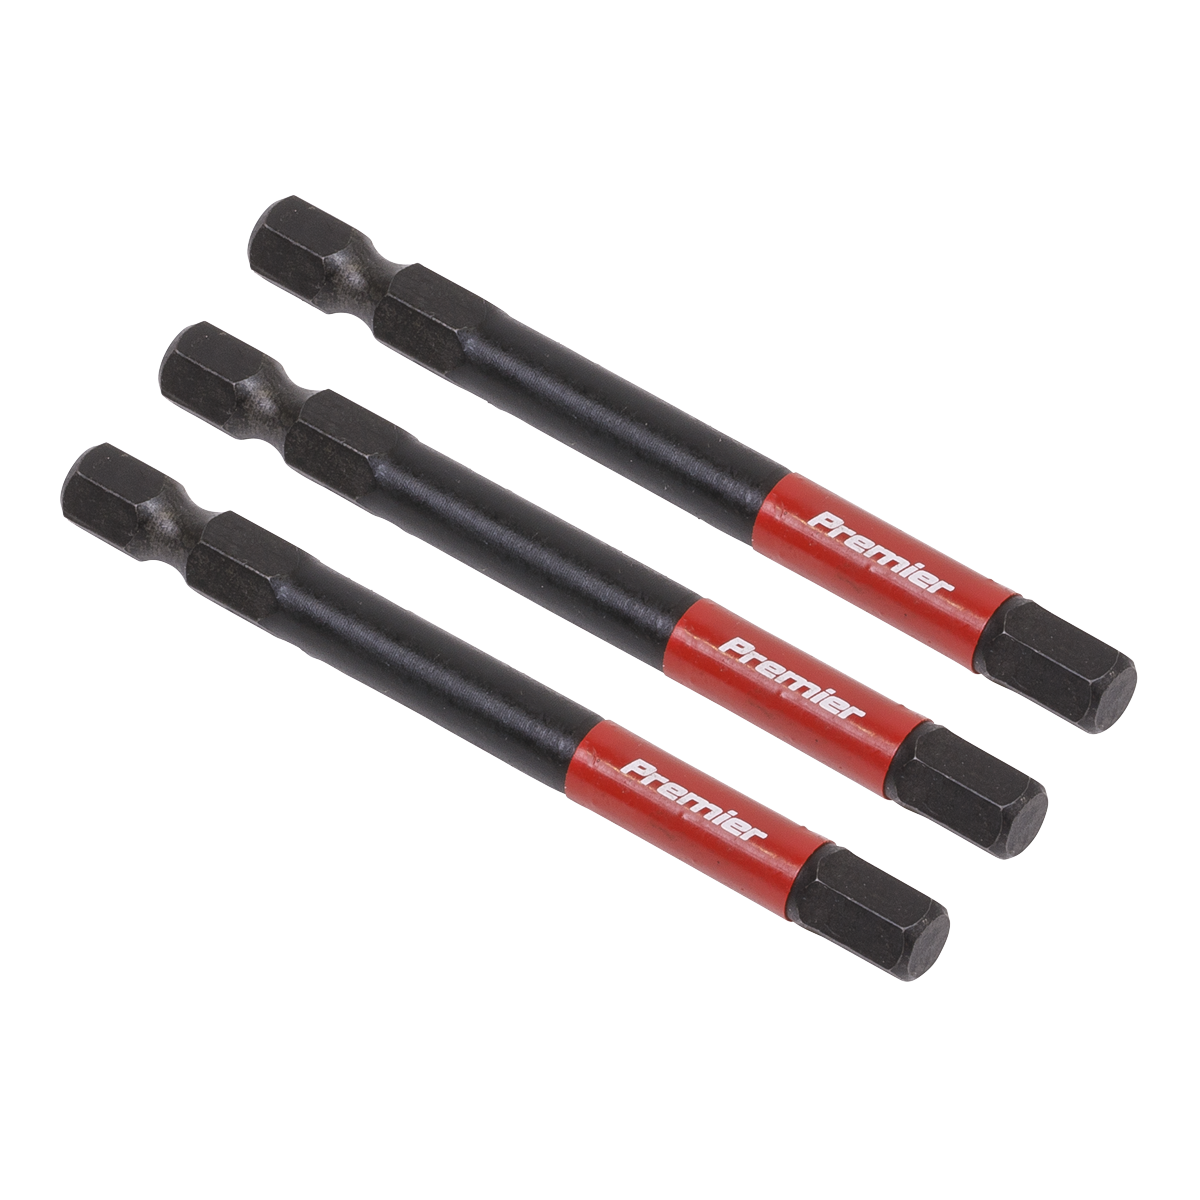 Sealey Hex 6mm Impact Power Tool Bits 75mm - 3pc